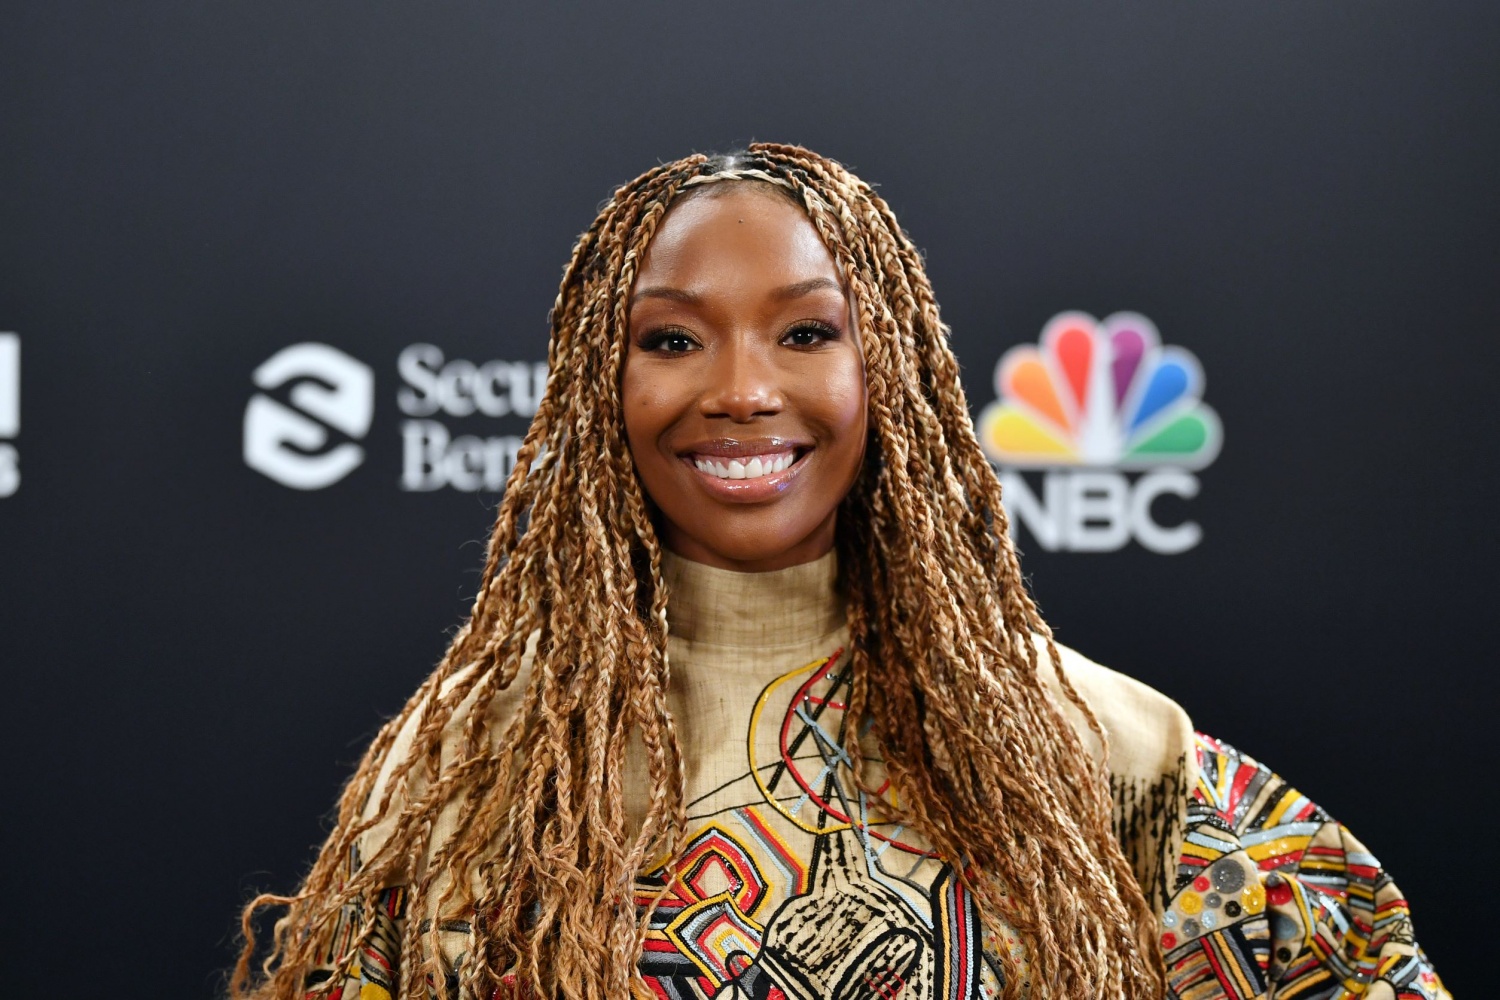 HOLLYWOOD, CALIFORNIA - OCTOBER 14: In this image released on October 14, Brandy poses backstage at the 2020 Billboard Music Awards, broadcast on October 14, 2020 at the Dolby Theatre in Los Angeles, CA. 